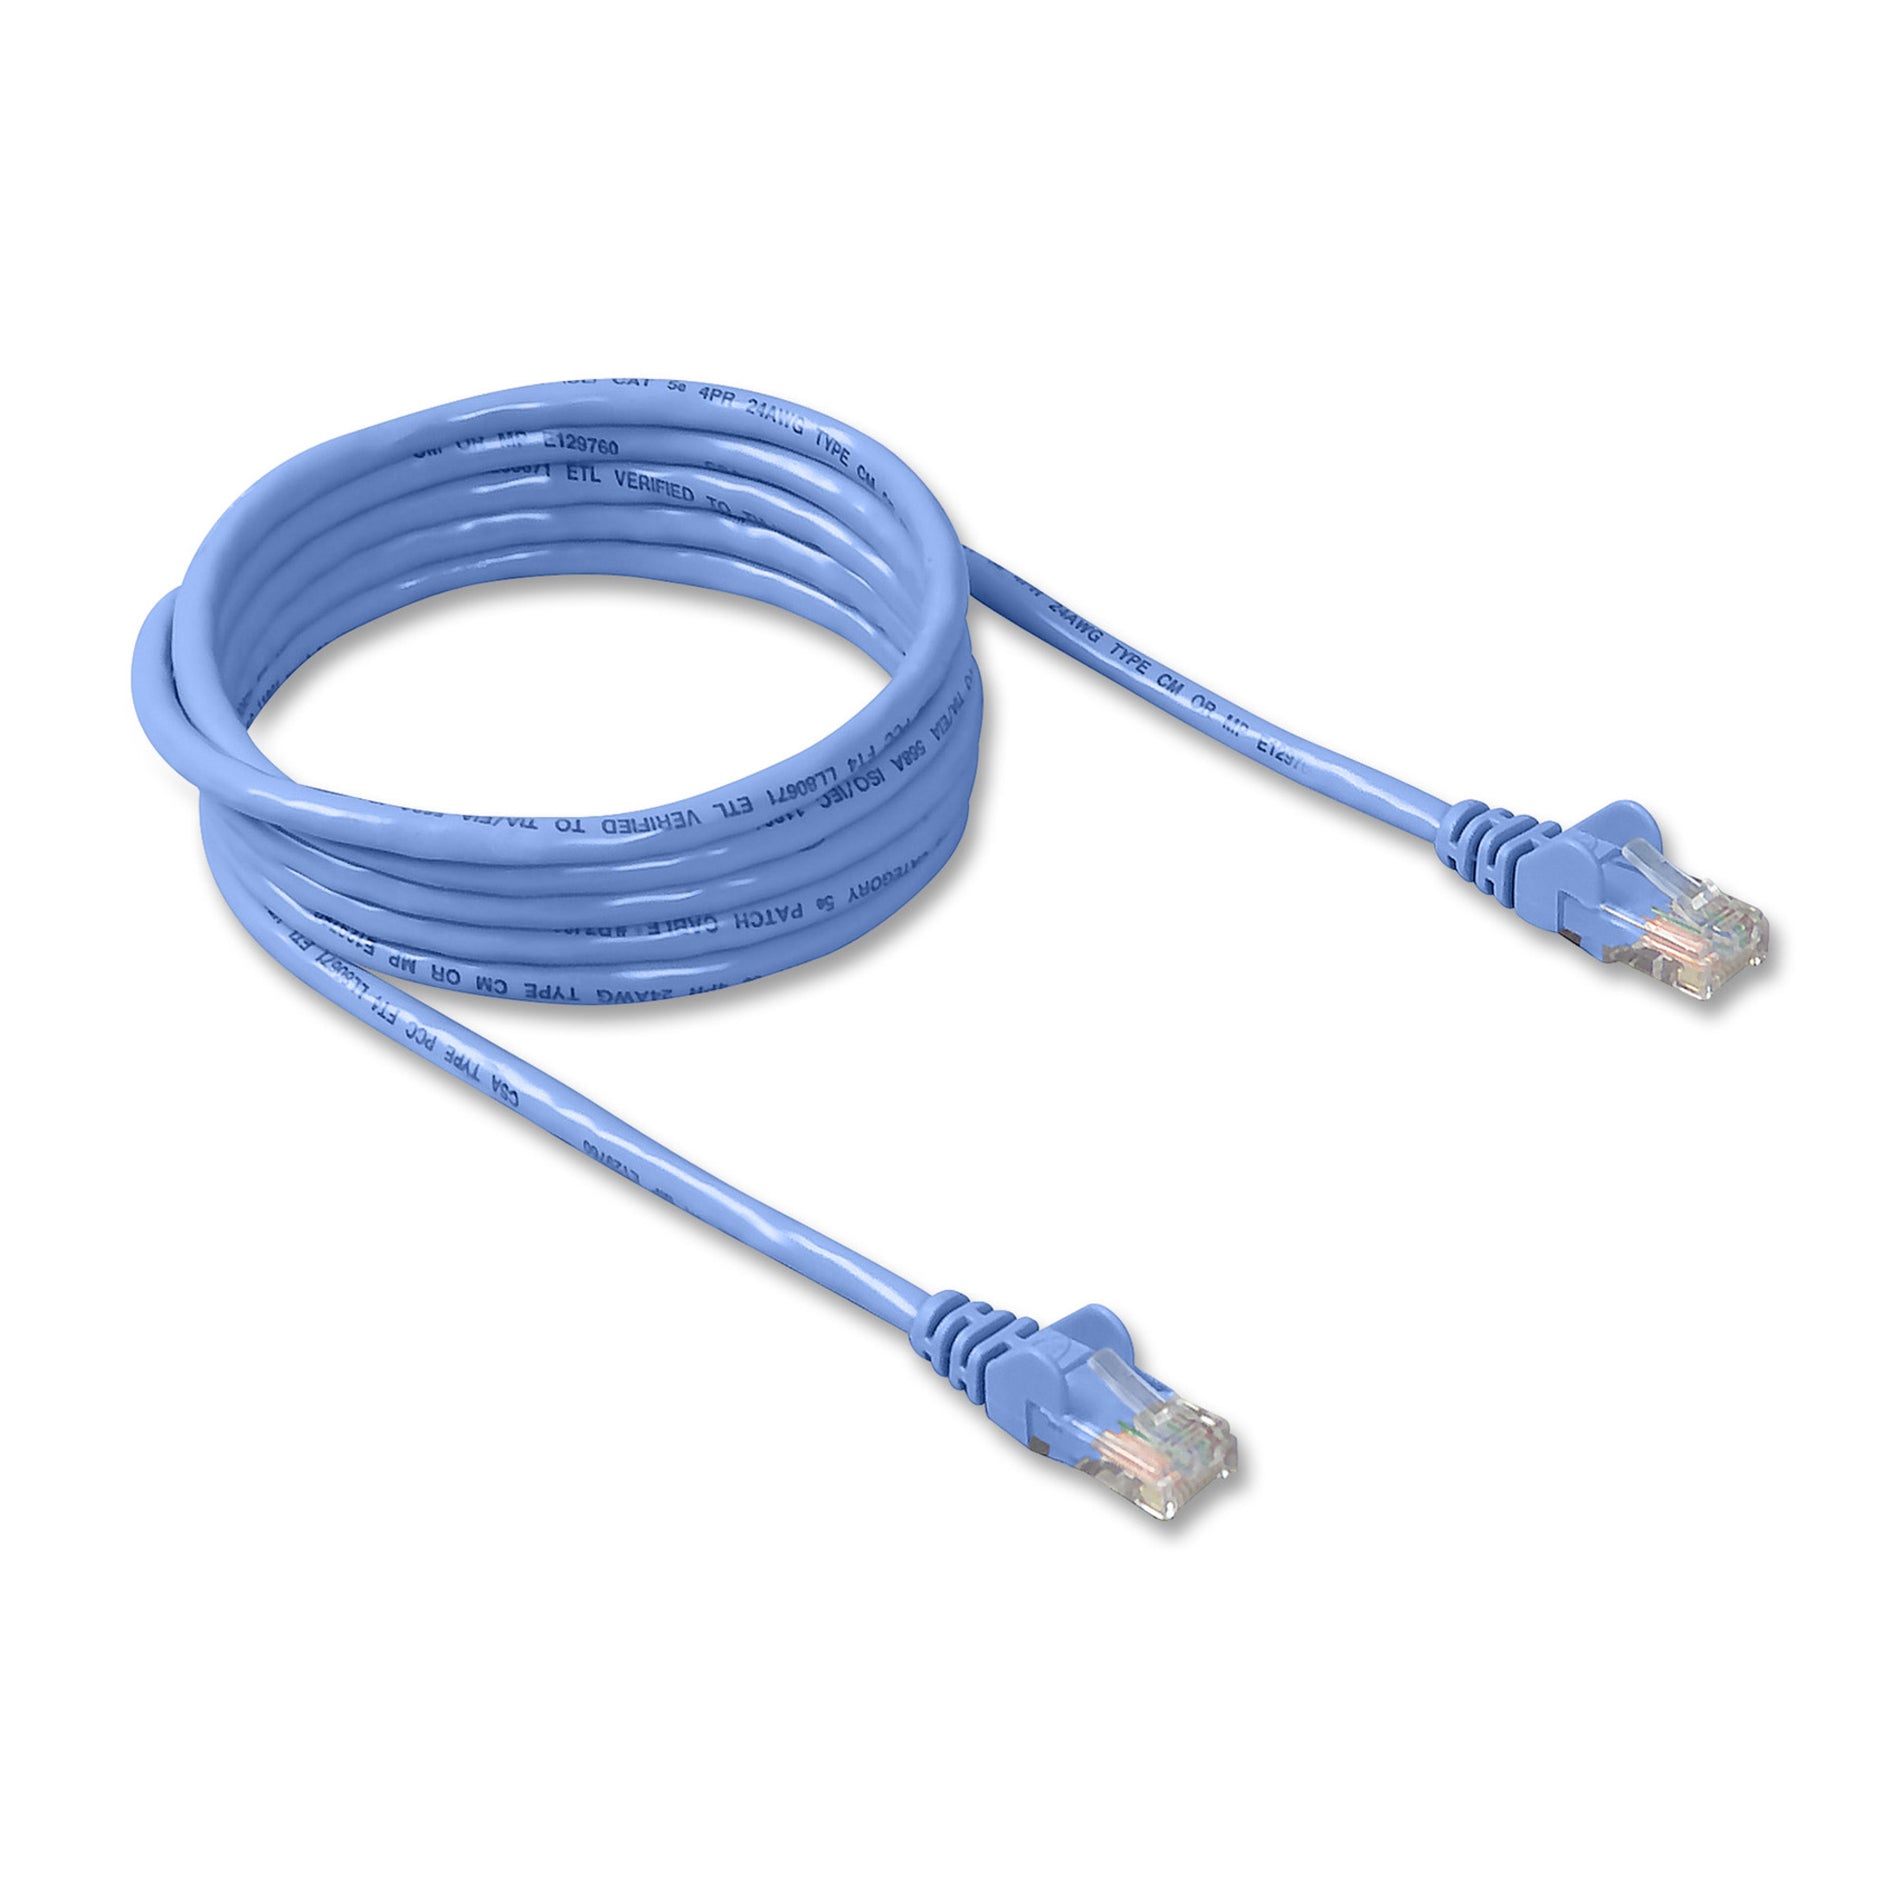 Belkin A3L791-03-BLU-S RJ45 CAT5e Snagless Patch Cable, 3 ft, Blue, Exceeds Category 5e Performance